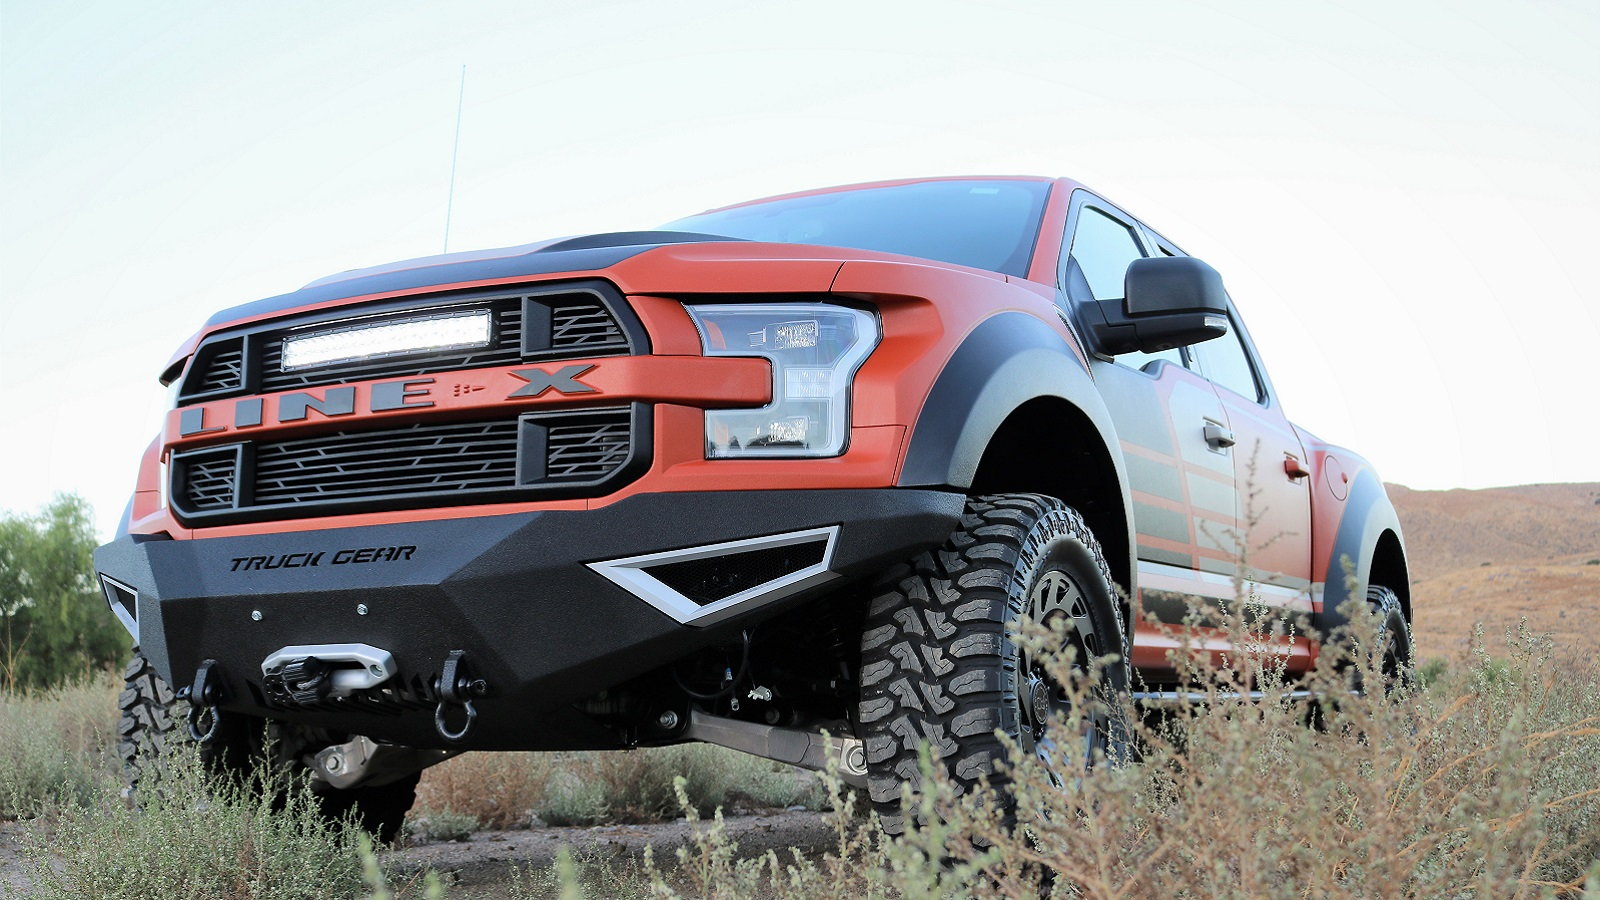 Line-X Coated Ford Raptor Is Allergic to Damn Near Any Scratches